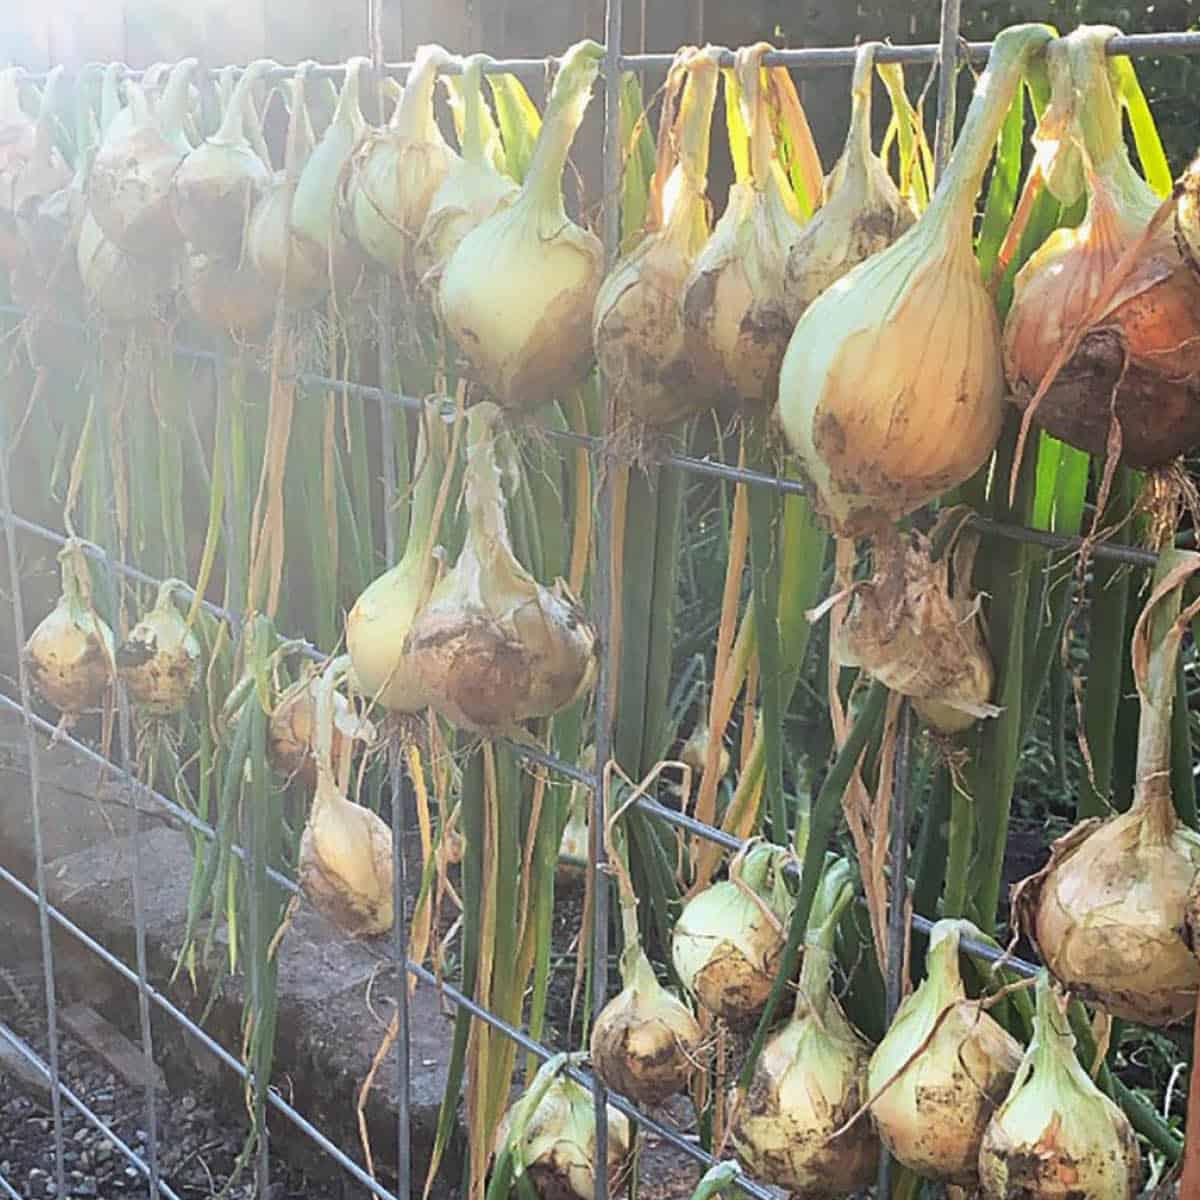 Homegrown onions hanging on a fence to finish curing